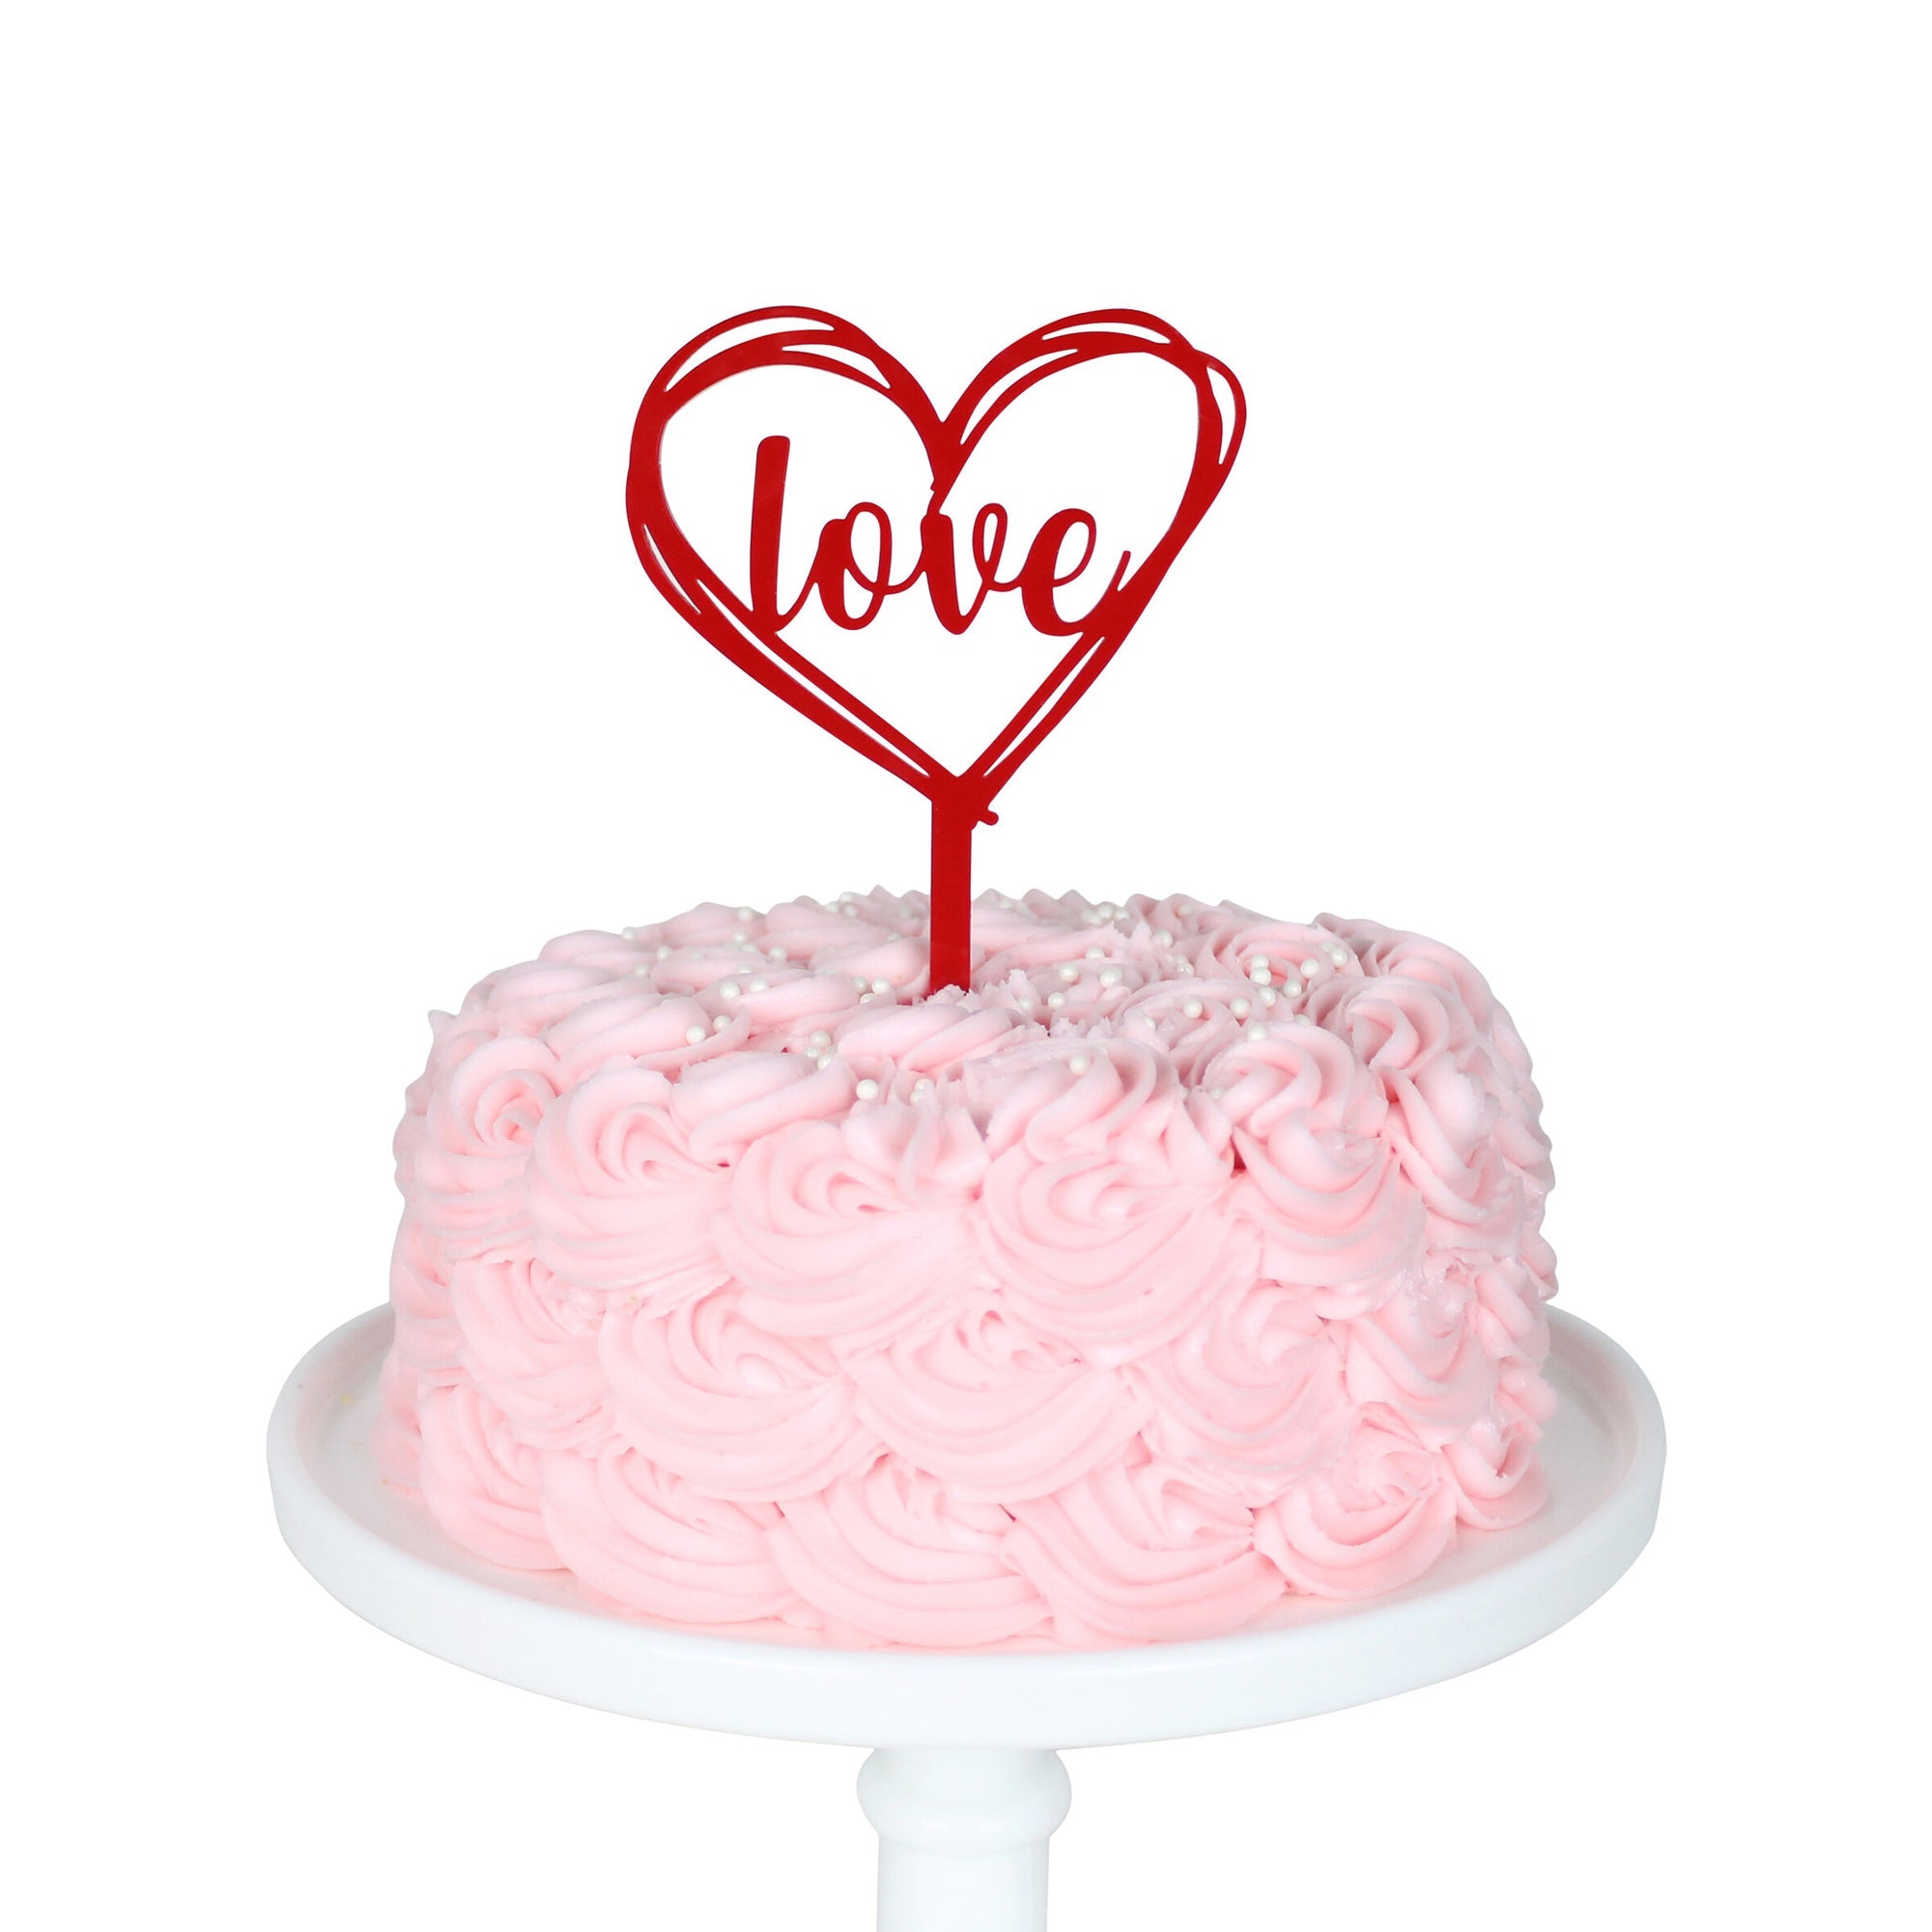 Love - Heart Acrylic Topper In Red